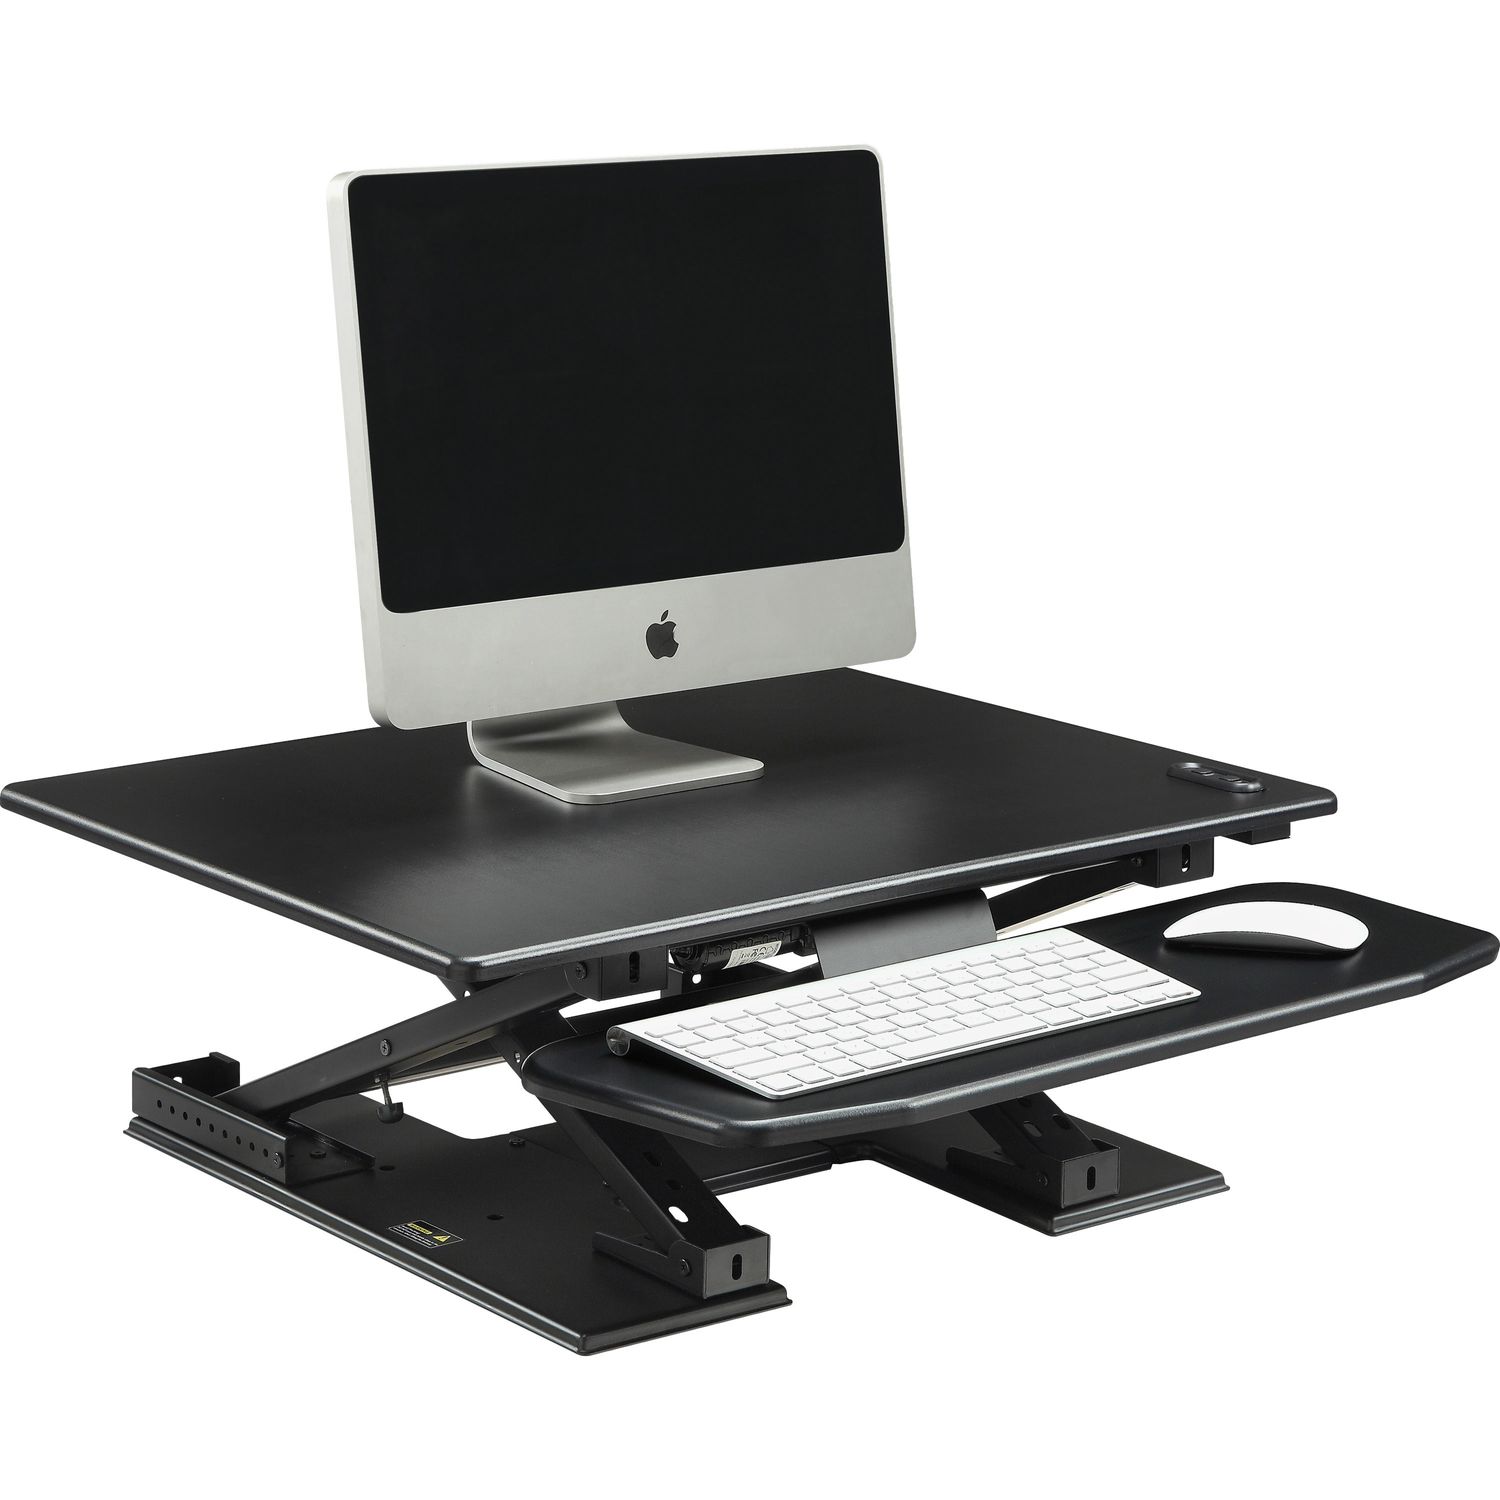 Sit-to-Stand Electric Desk Riser Up to 33" Screen Support, Flat Panel Display Type Supported, 17.1" Height x 28.8" Width x 35.8" Depth, Desktop, Aluminum, Black